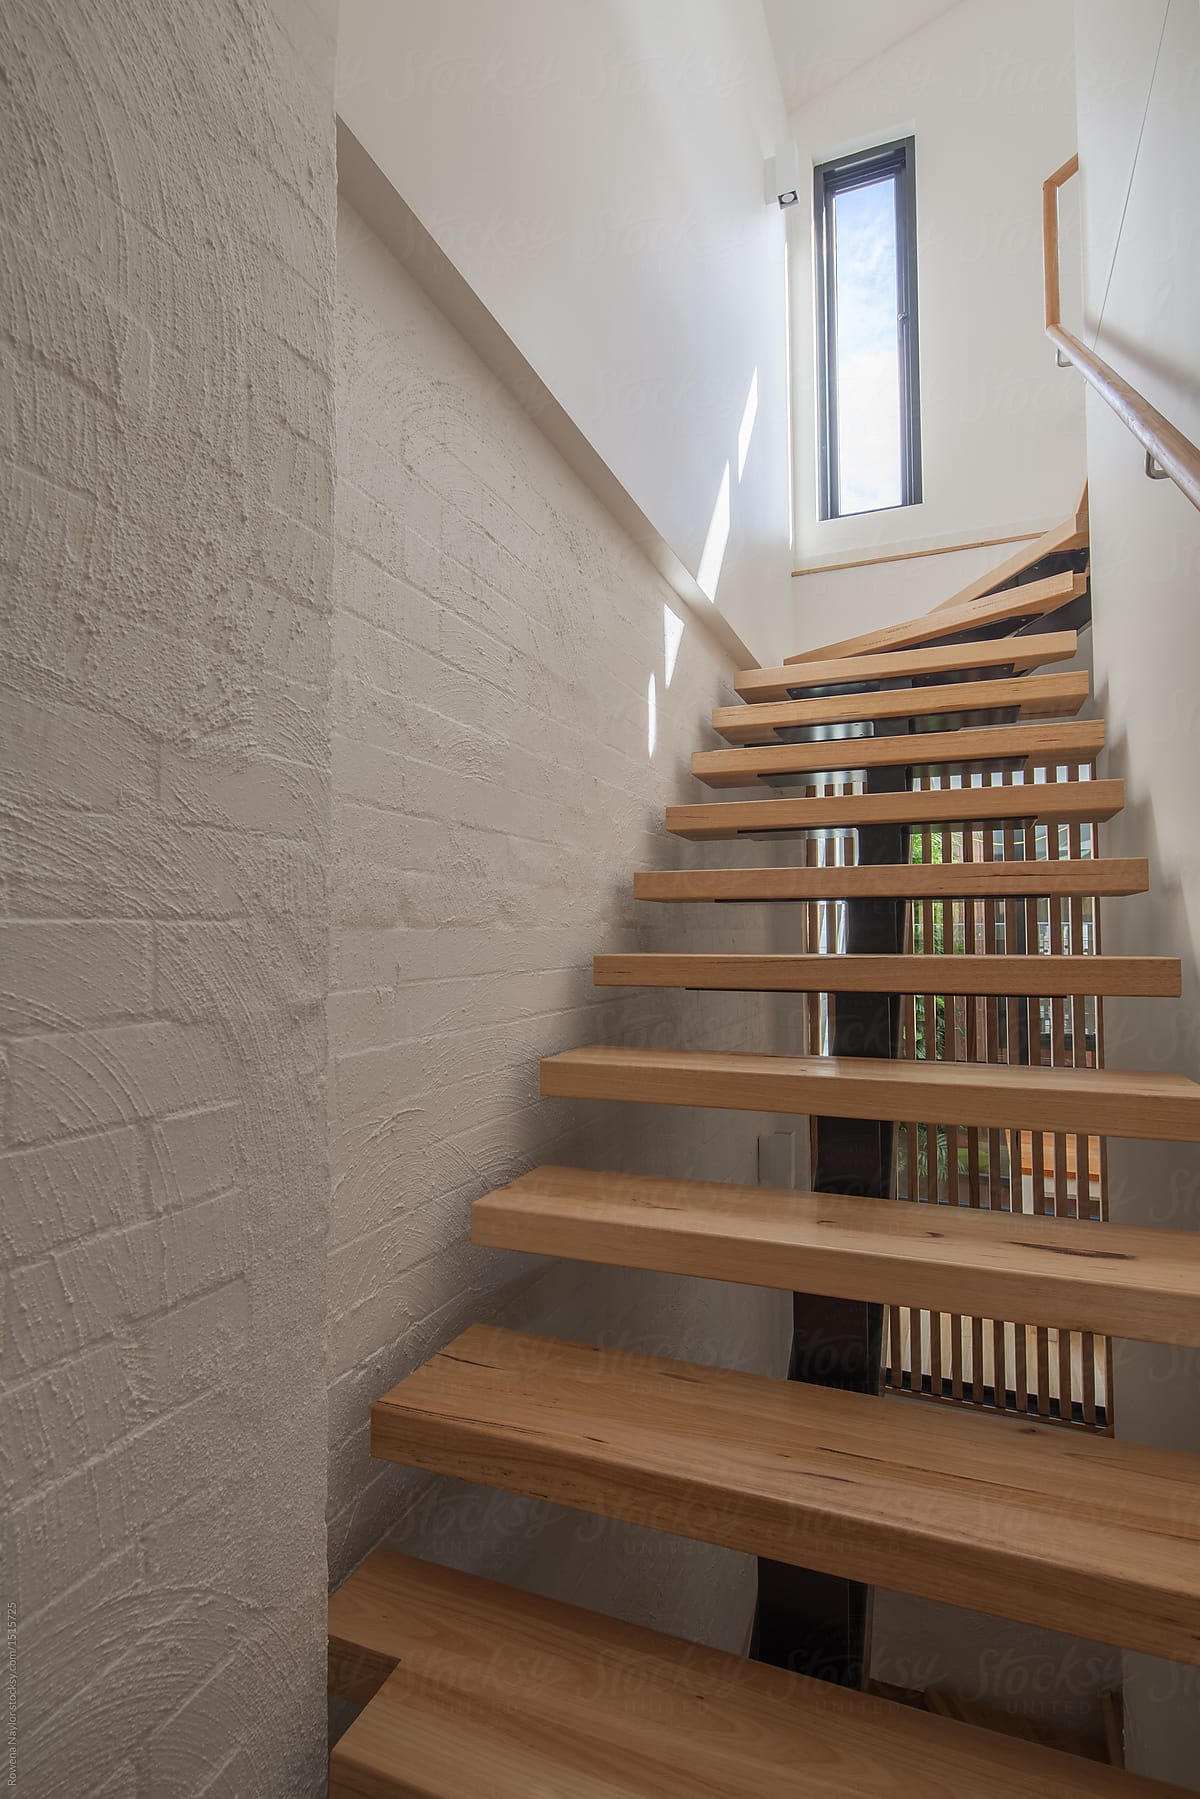 Timber staircase to upper levels of converted warehouse apartment